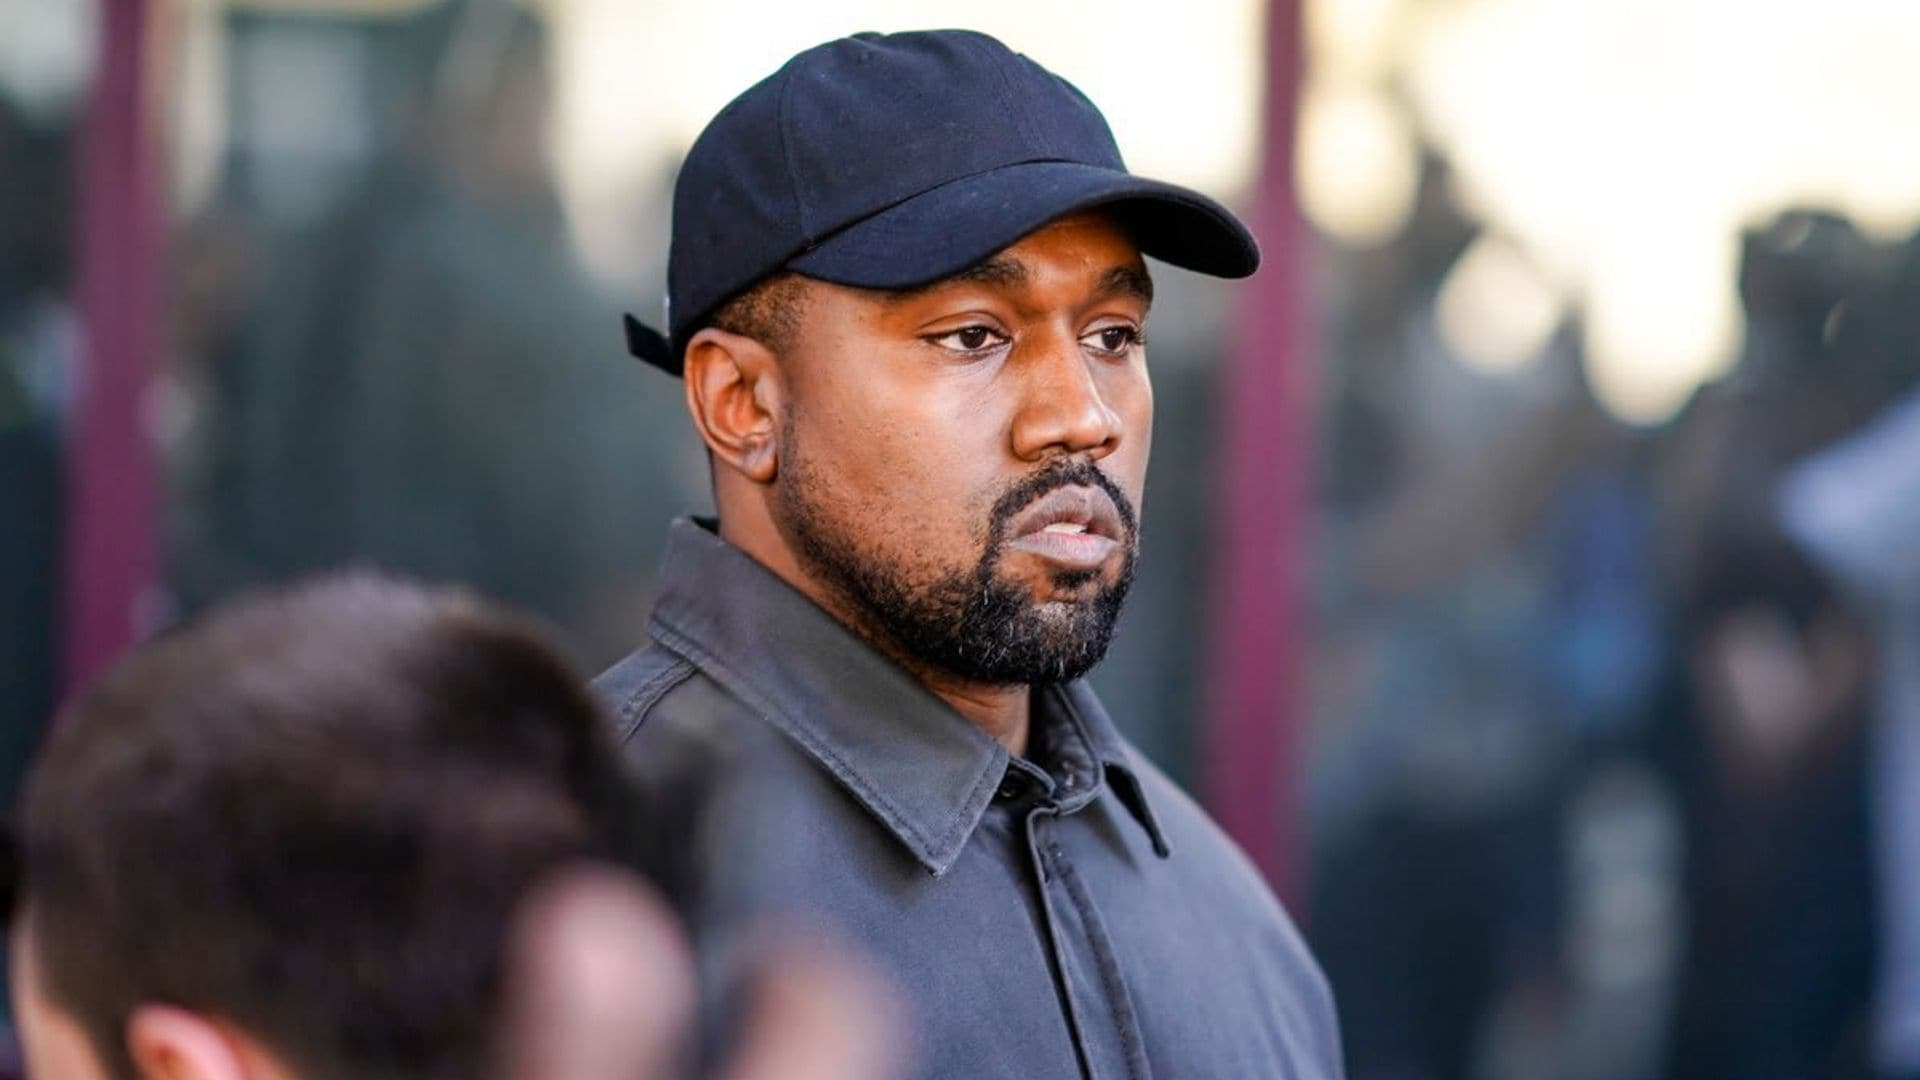 Kanye West claims new album ‘Donda’ was released without his permission